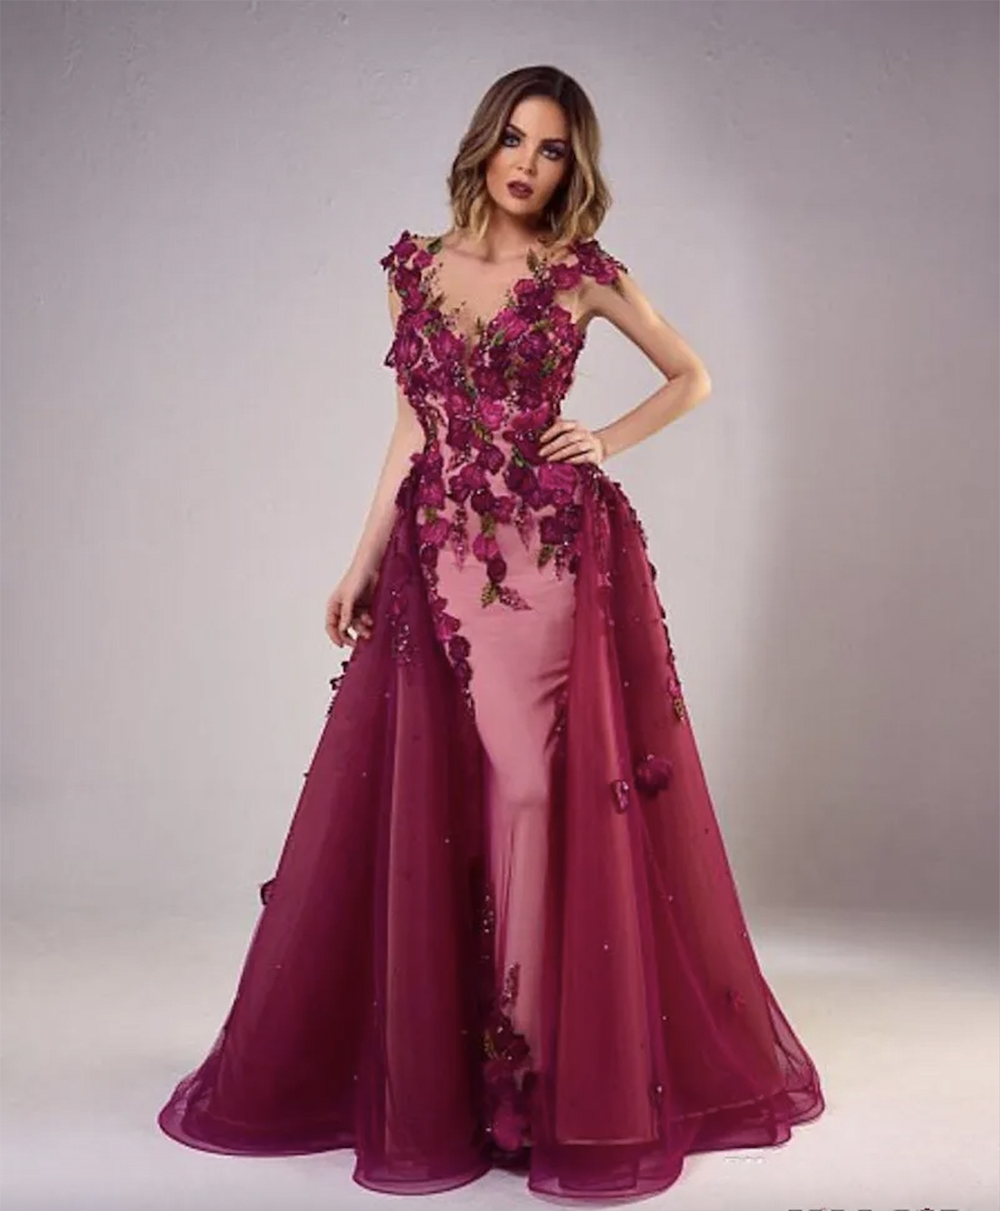 New Tony Chaaya Evening Dresses With Detachable Train Burgundy Beads Mermaid Prom Gowns Lace Applique Sleeveless Luxury Party Dress